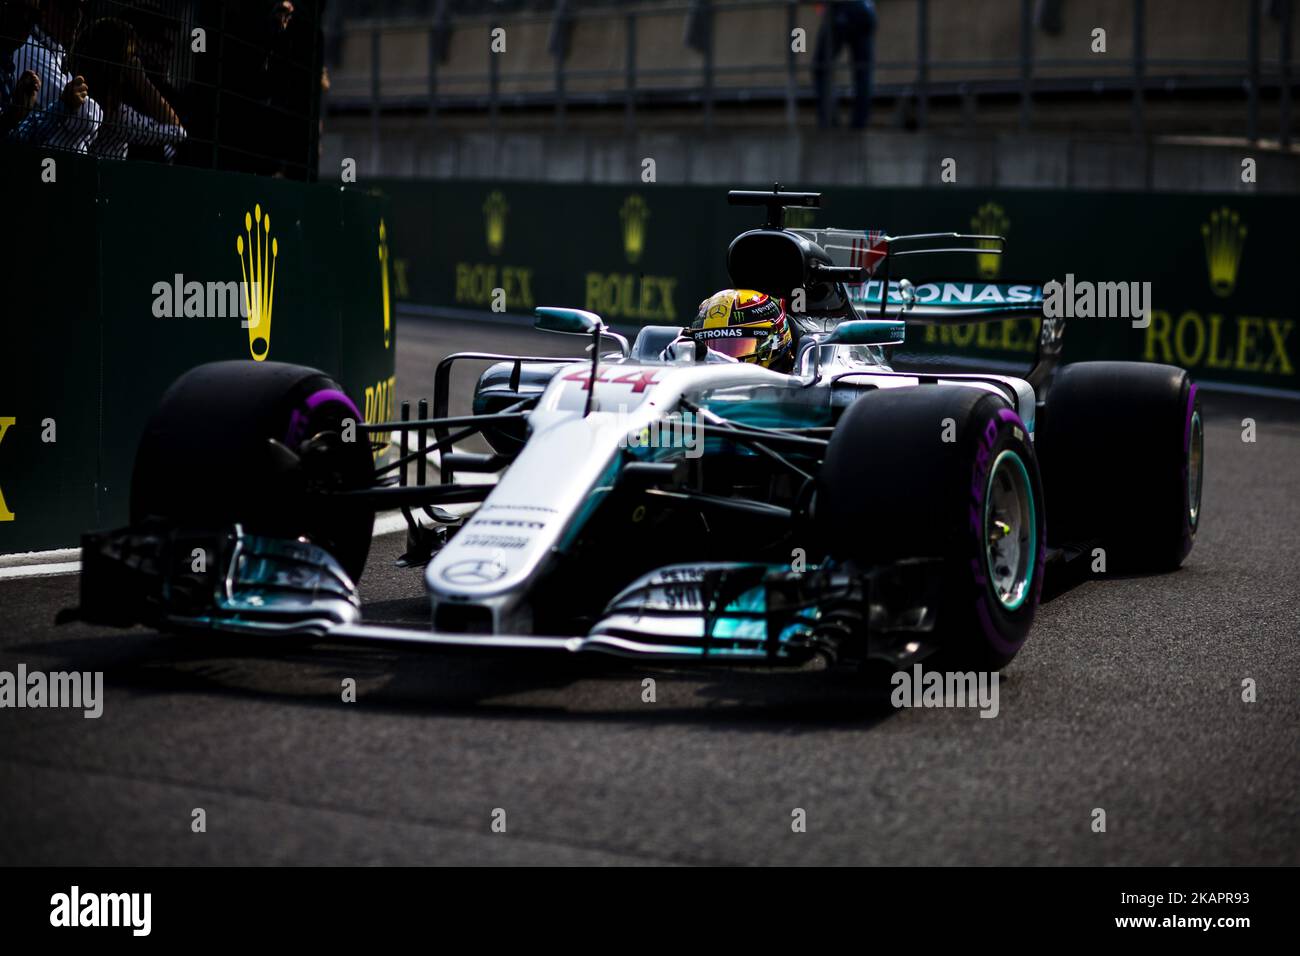 44 HAMILTON Lewis from Great Britain of team Mercedes GP during the Qualifying of Formula One Belgian Grand Prix at Circuit de Spa-Francorchamps on August 25, 2017 in Spa, Belgium. (Photo by Xavier Bonilla/NurPhoto) Stock Photo